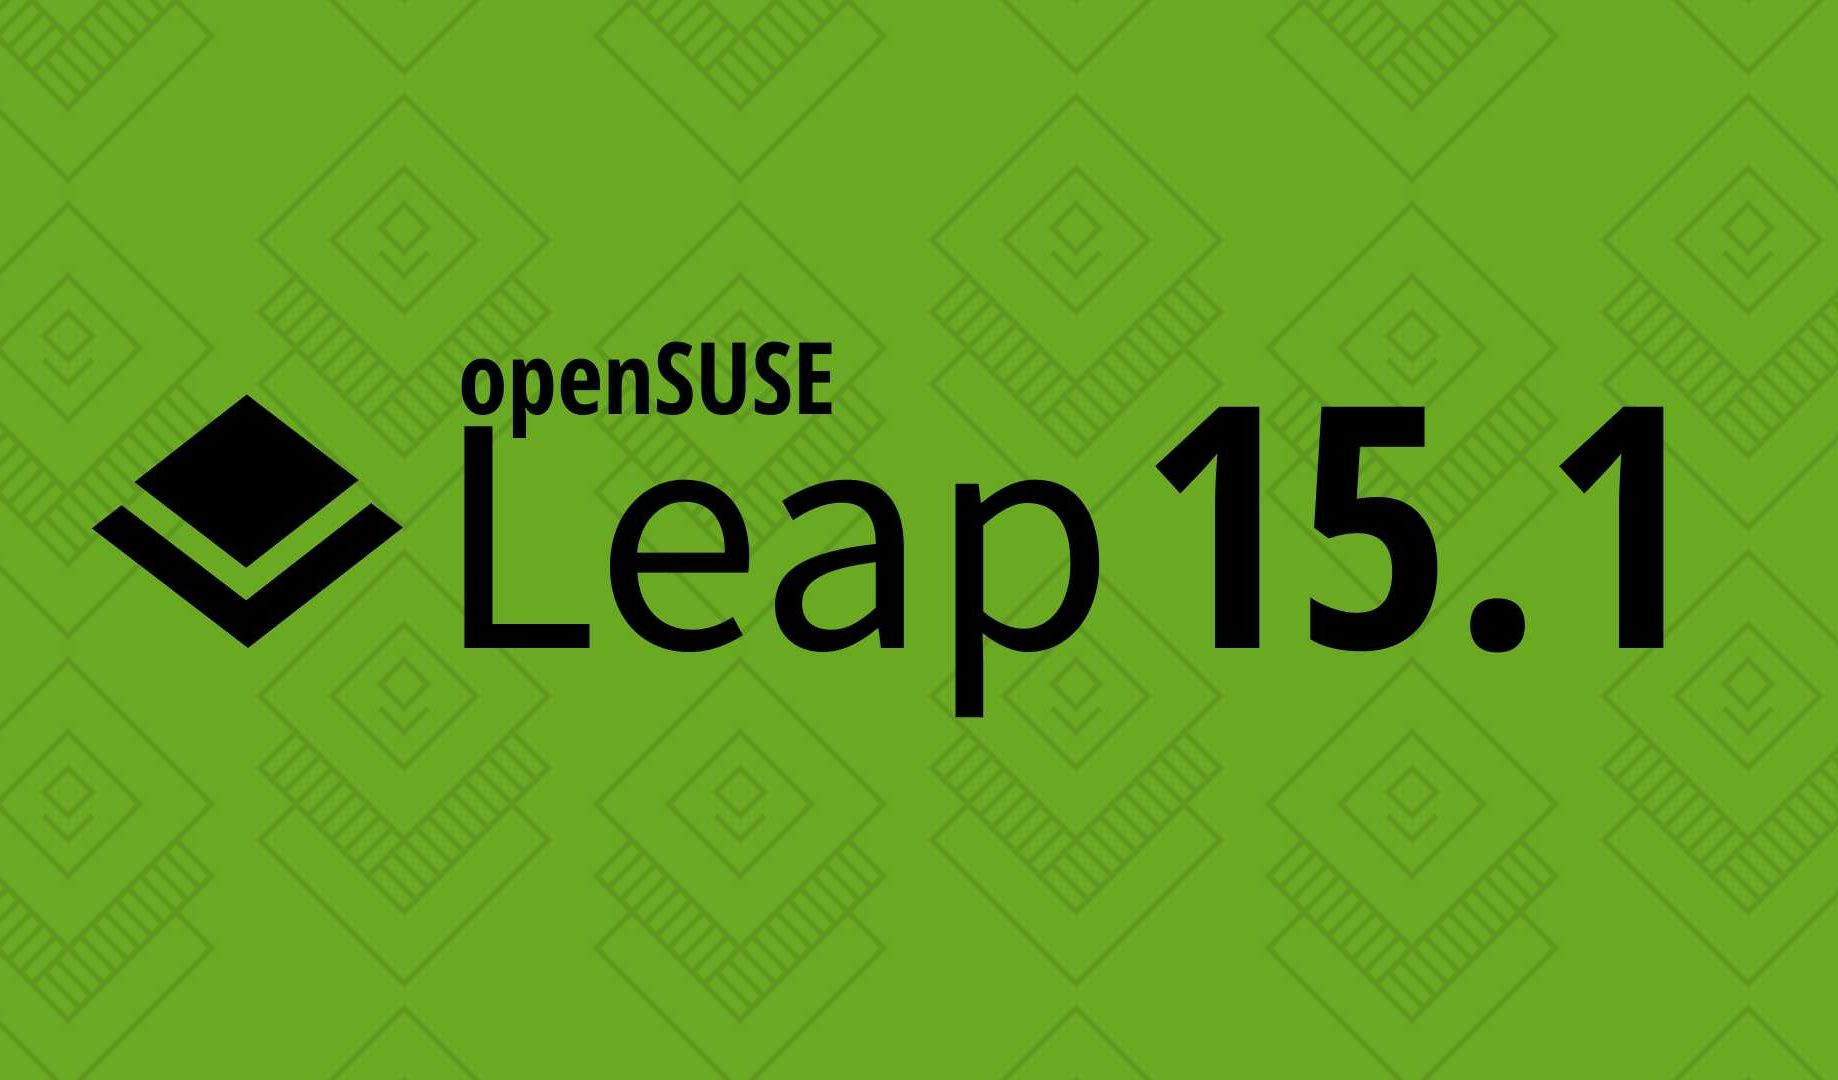 opensuse leap 15.1